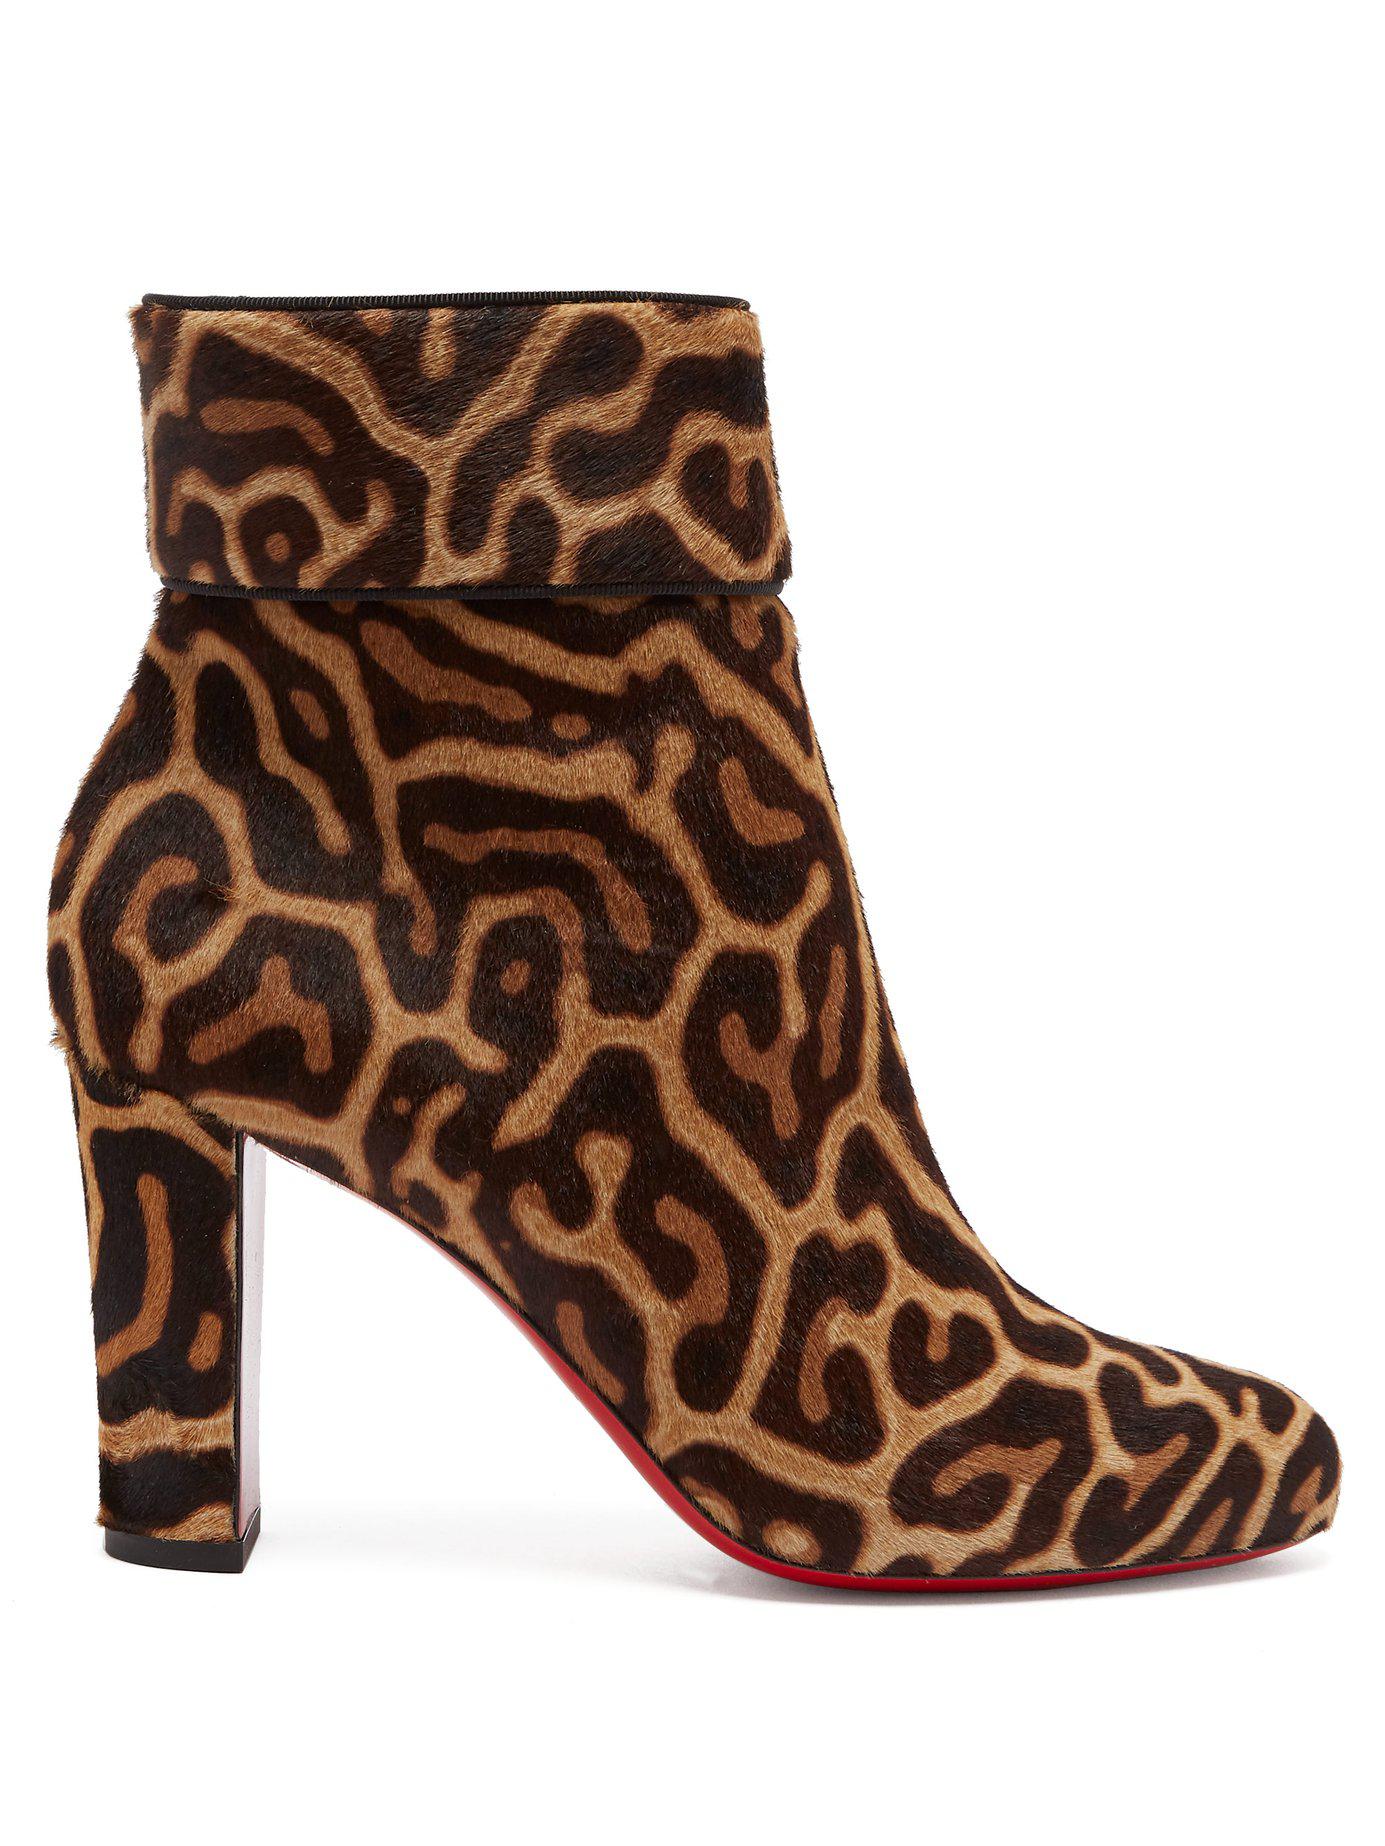 Christian Louboutin Moulamax 85 Leopard Print Pony Hair Ankle Boots in ...